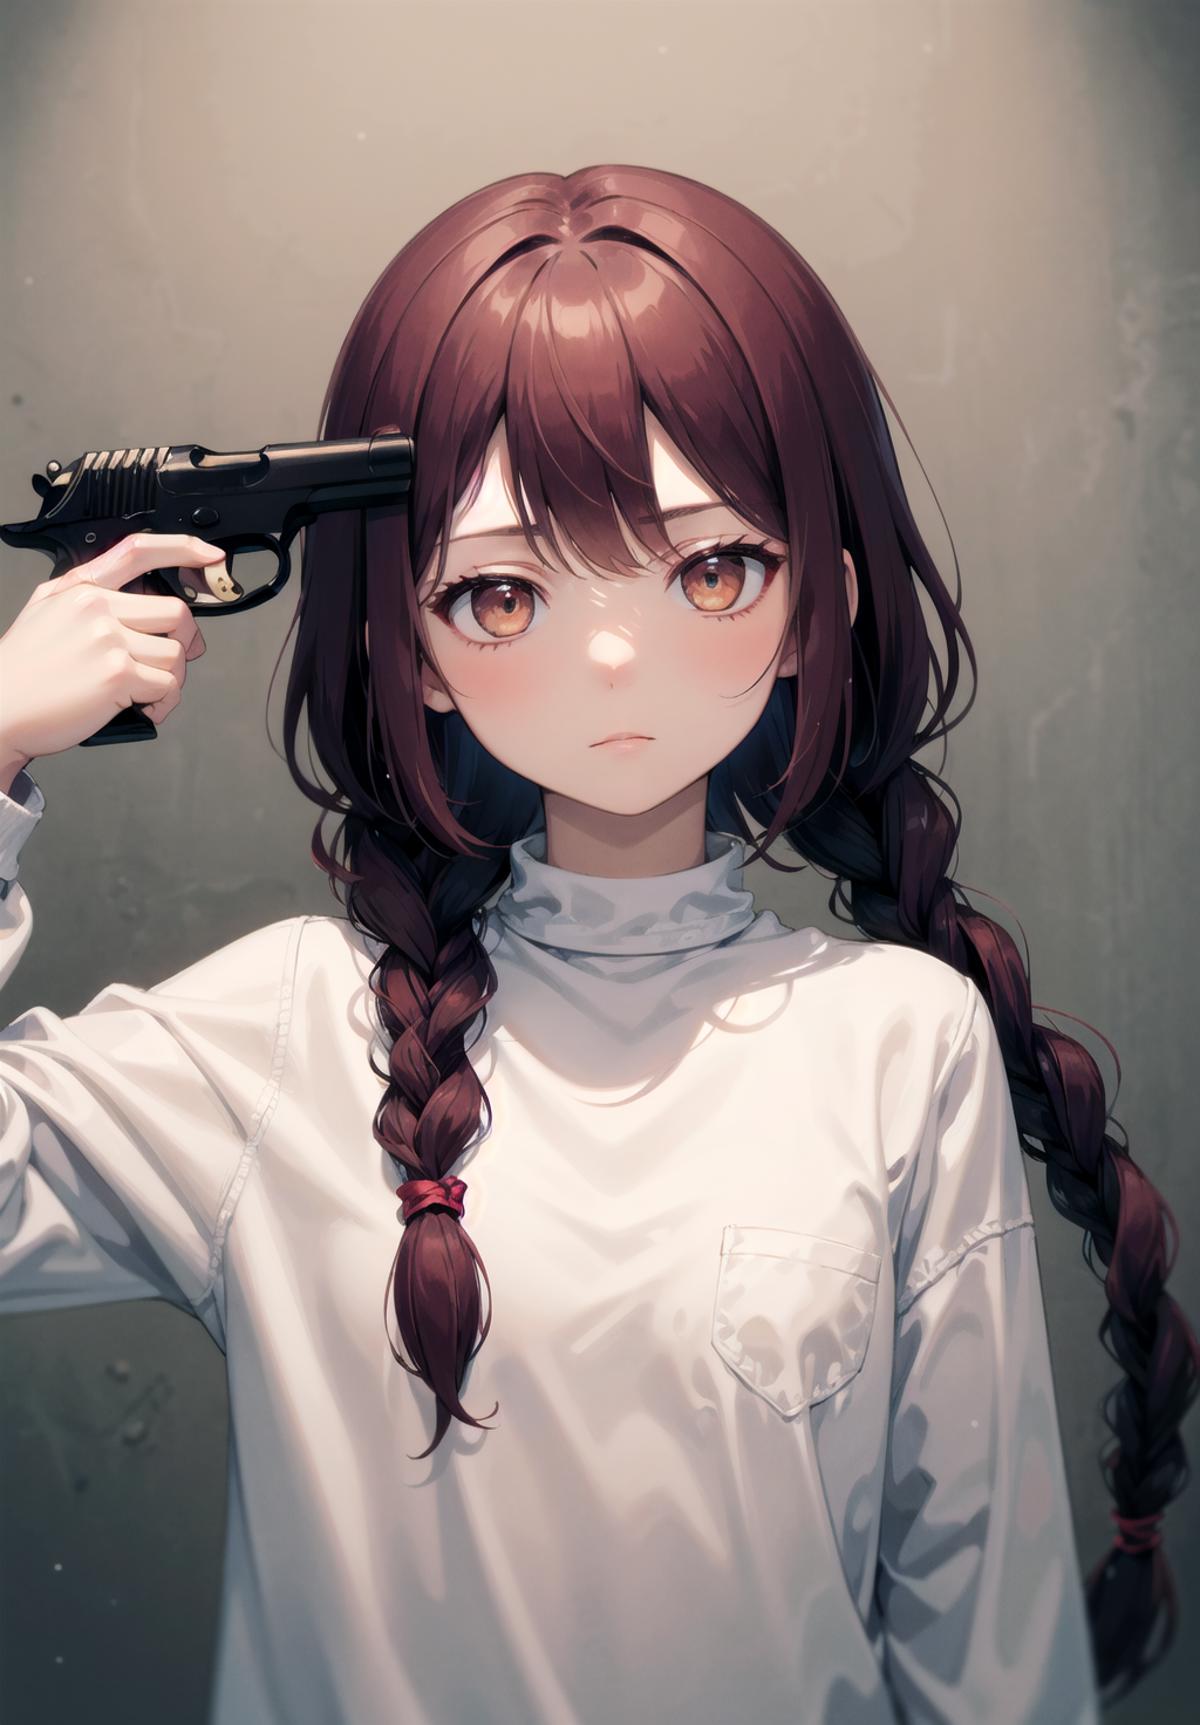 Anime girl with red hair holding a gun to her head.